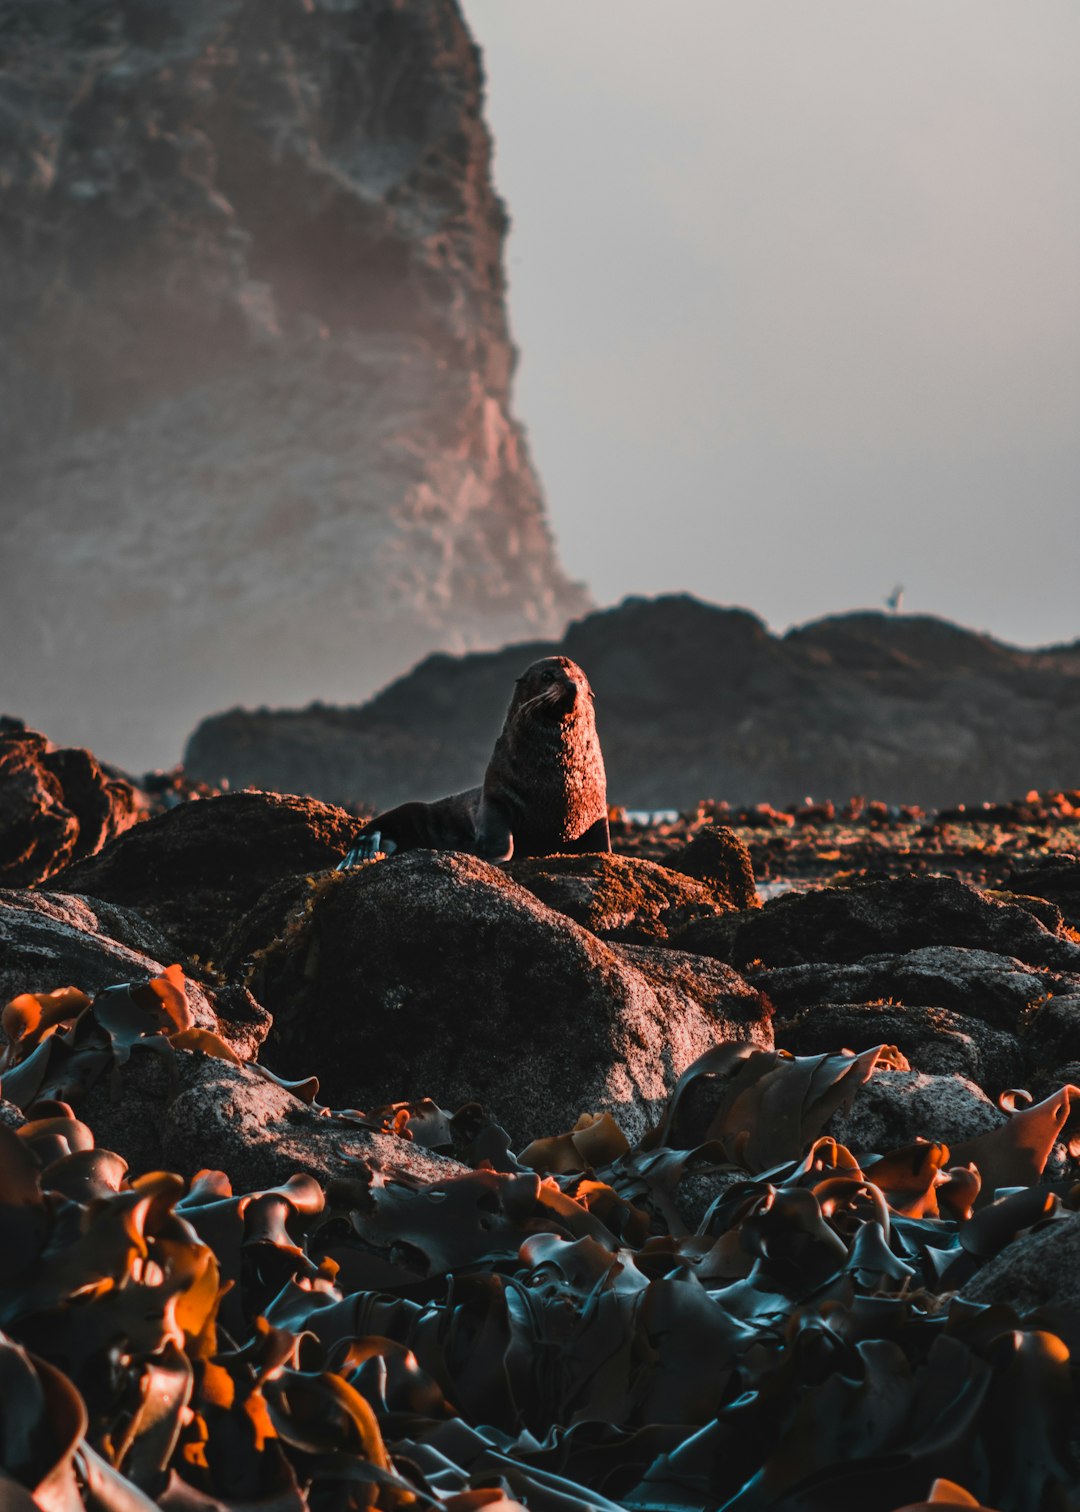 sealion surrounded by rocks during daytime